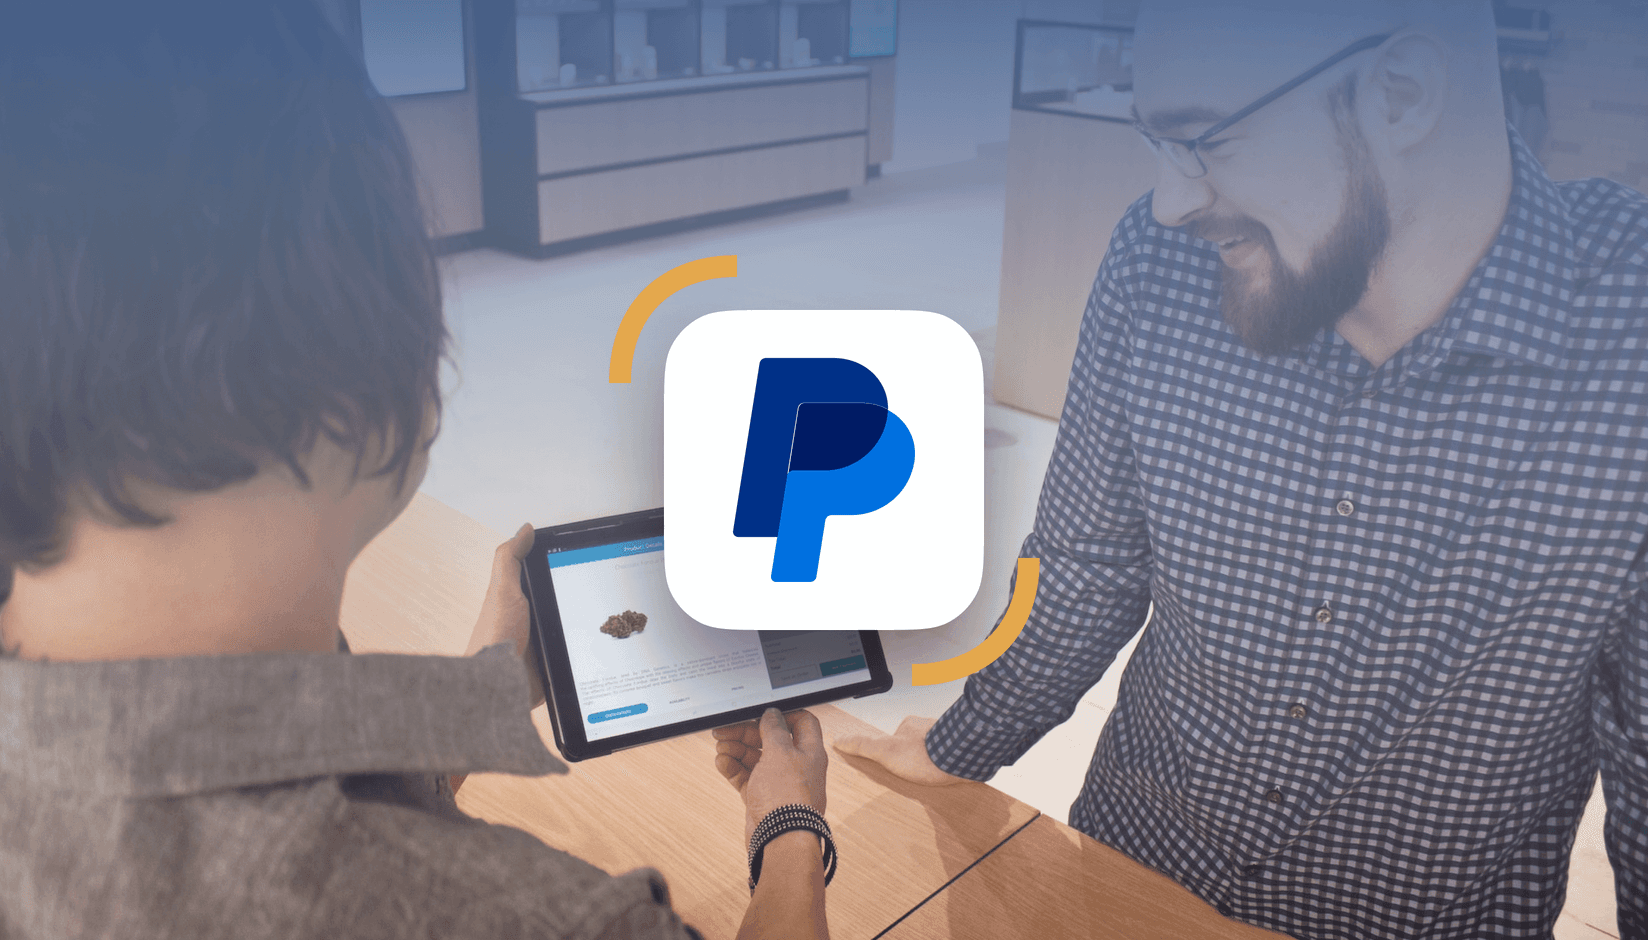 andcards Customers Can Now Accept PayPal Payments